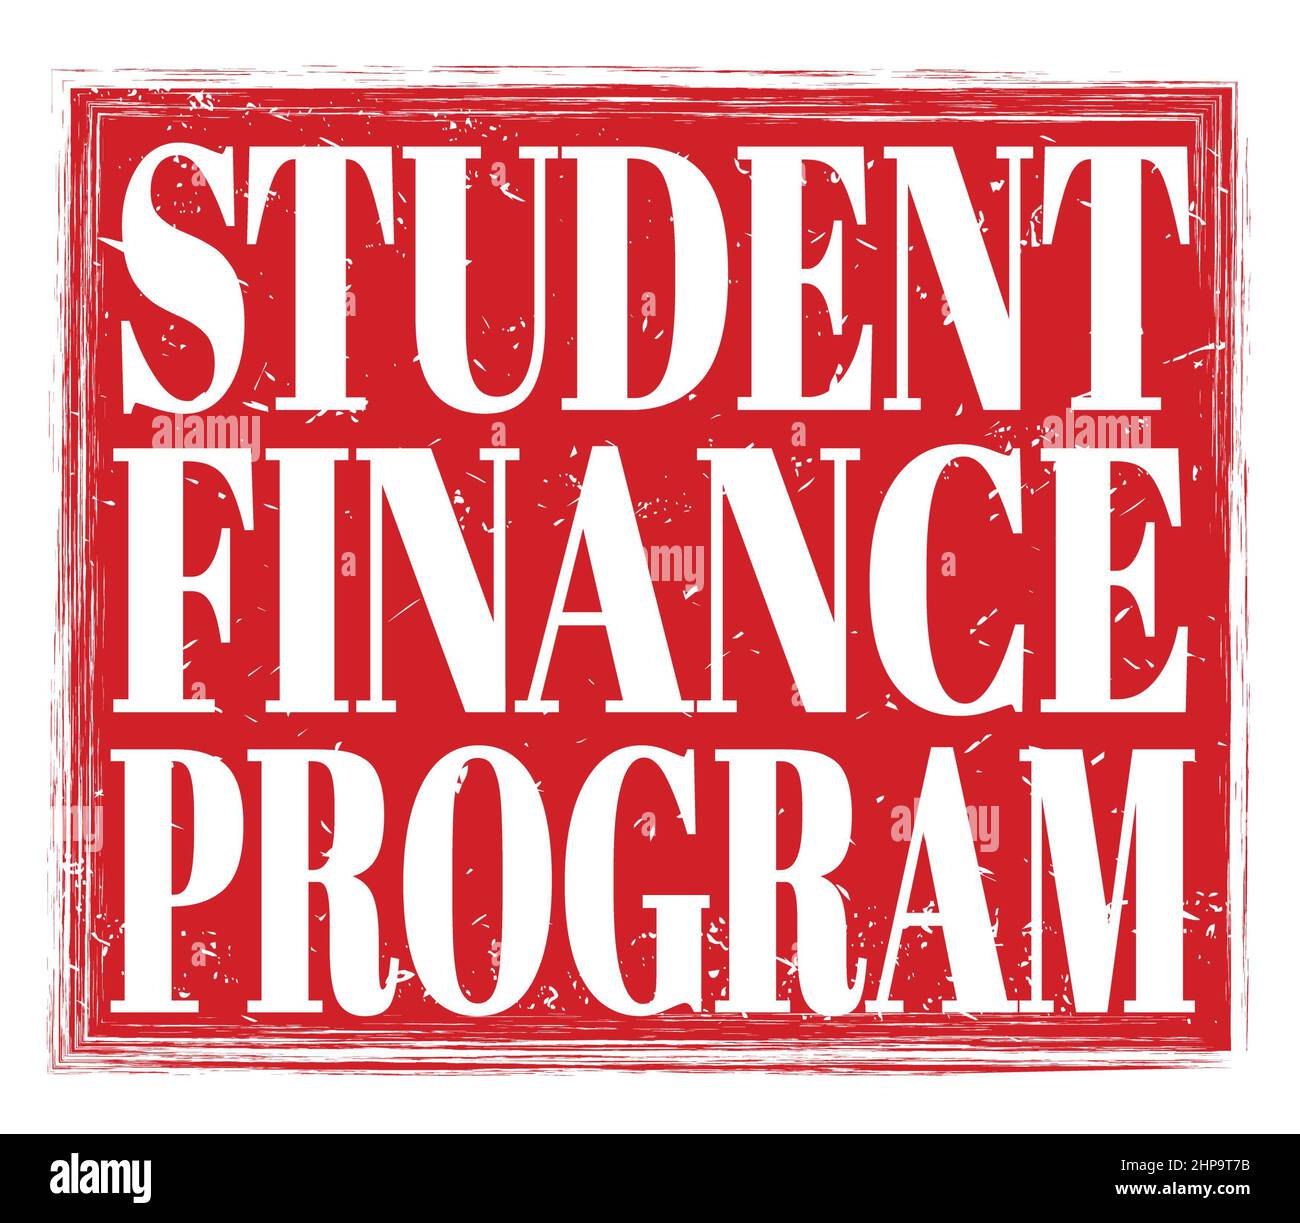 STUDENT FINANCE PROGRAM, written on red grungy stamp sign Stock Photo